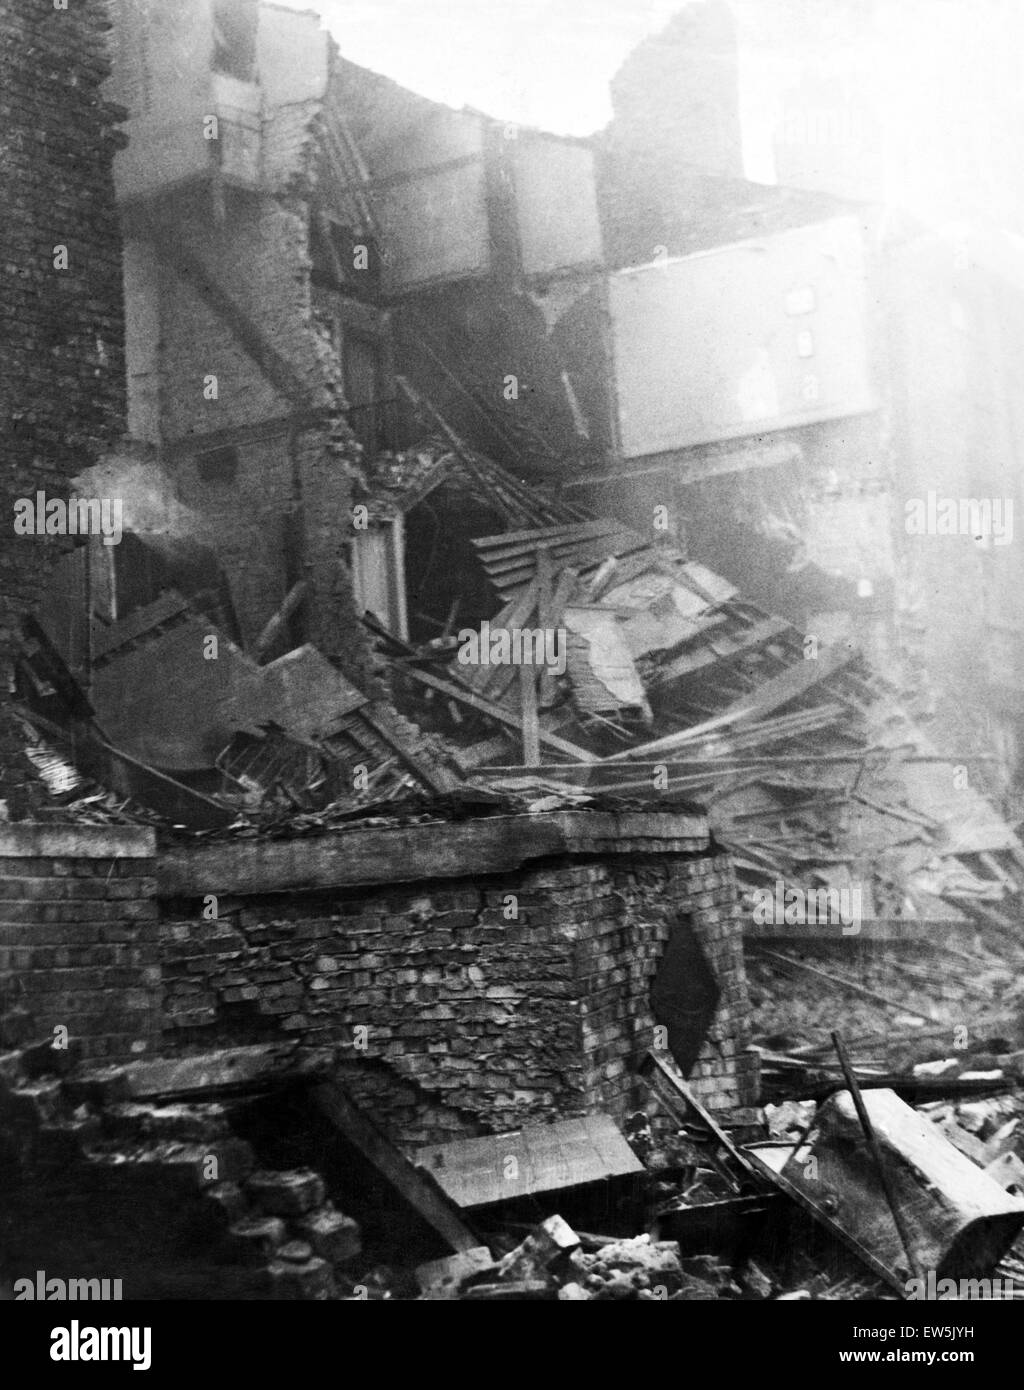 Bomb damage in Upper Canning Street, Liverpool. The shelters shown in the foreground were only slightly damaged and their occupants unhurt, when a high explosive bomb damaged houses converted into flats during a raid on 27th October 1940. 28th October 194 Stock Photo